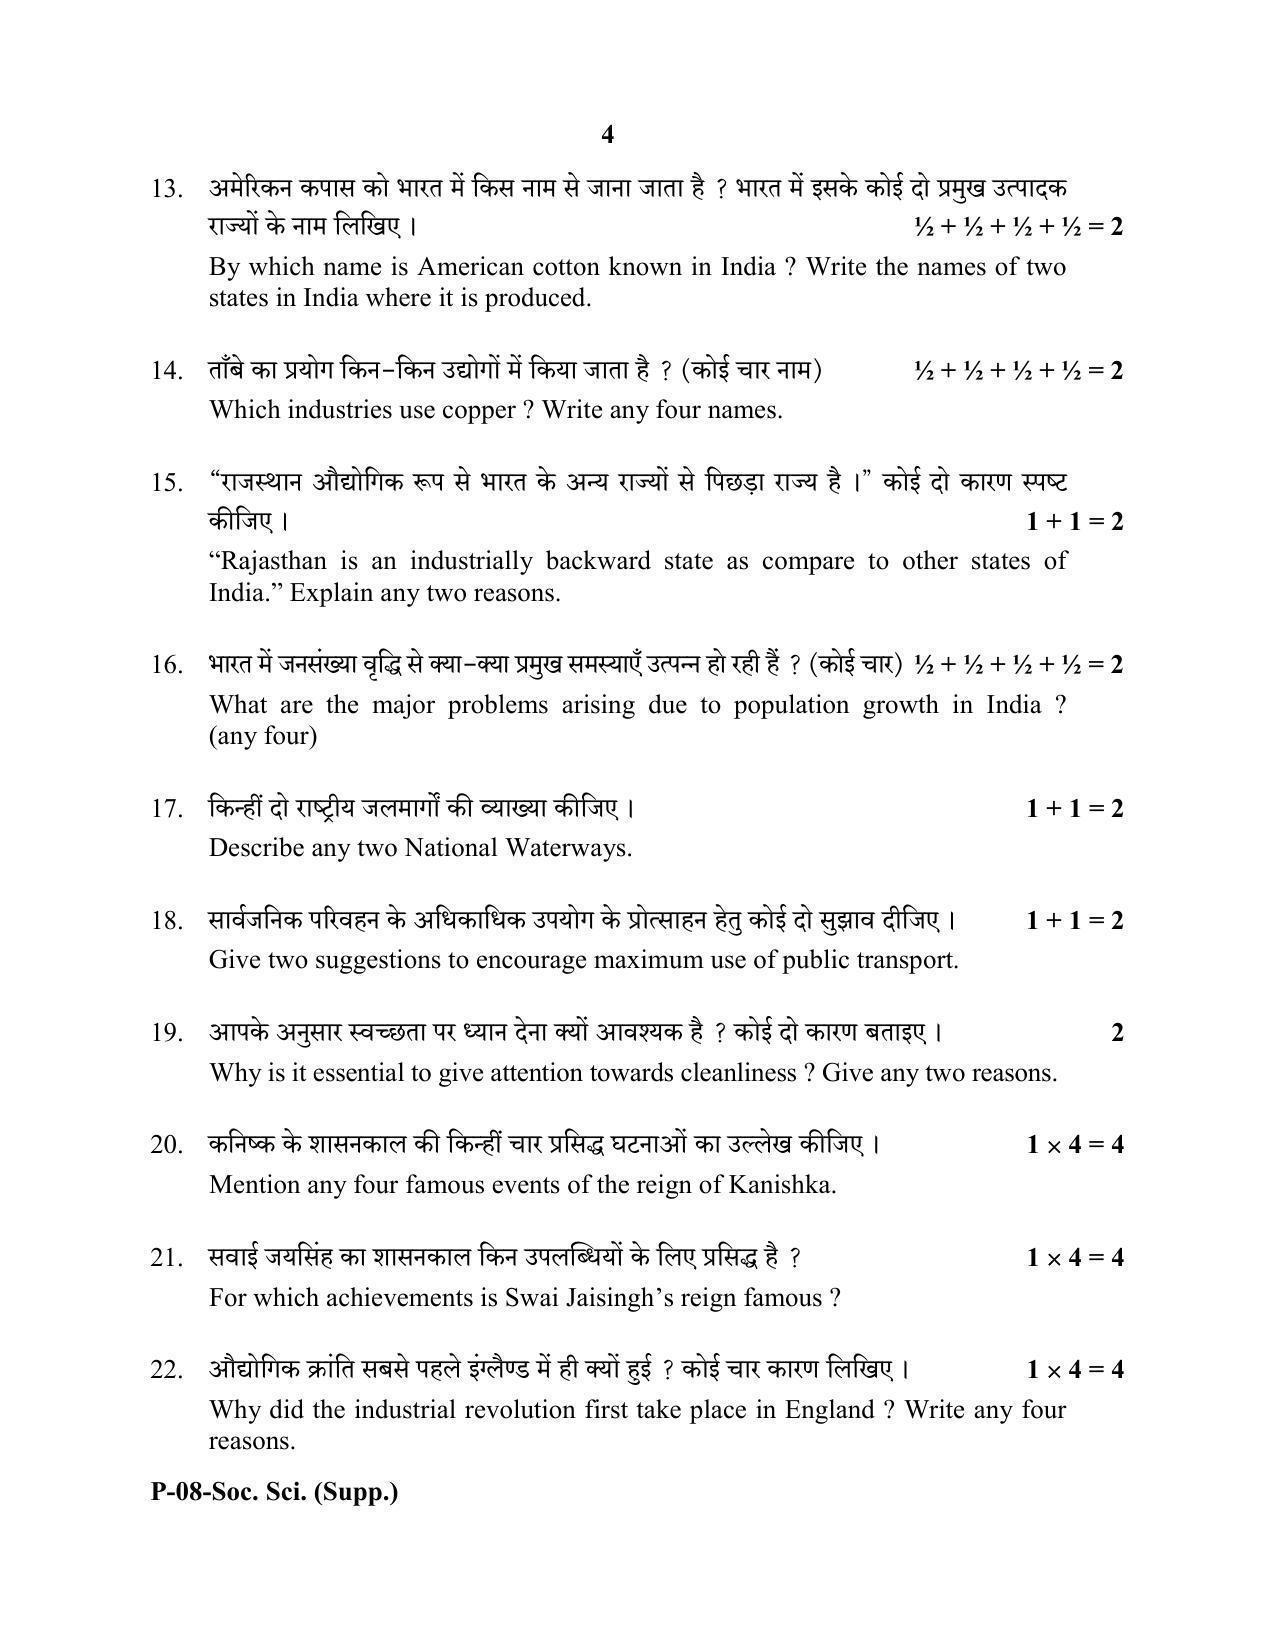 RBSE 2020 Social Science  (SUPPLEMENTARY) Praveshika Question Paper - Page 4